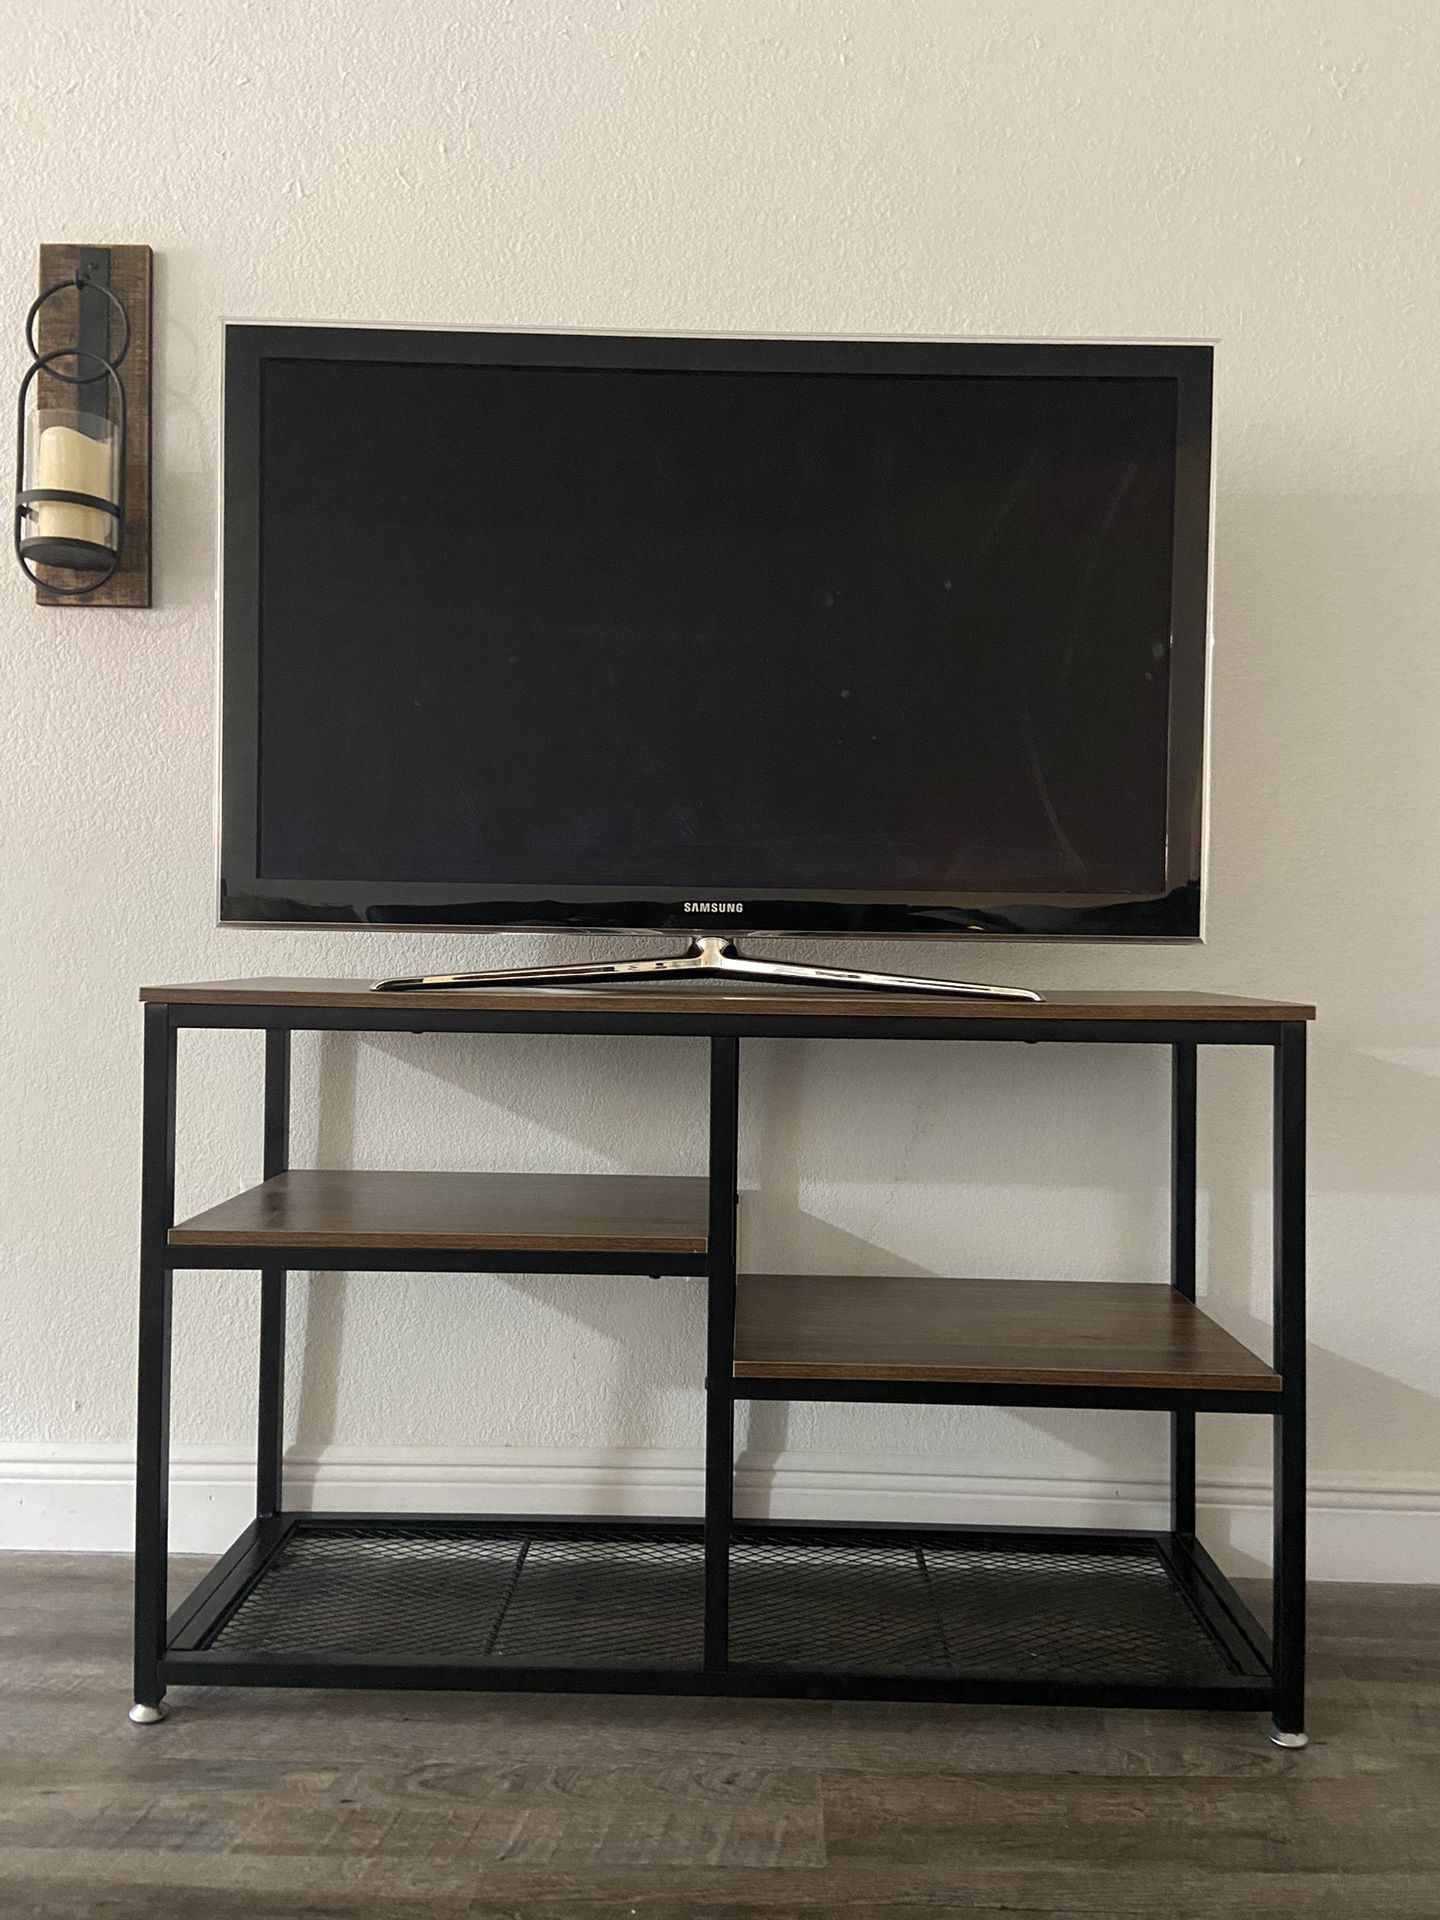 46 Inch Samsung Tv with Console Table